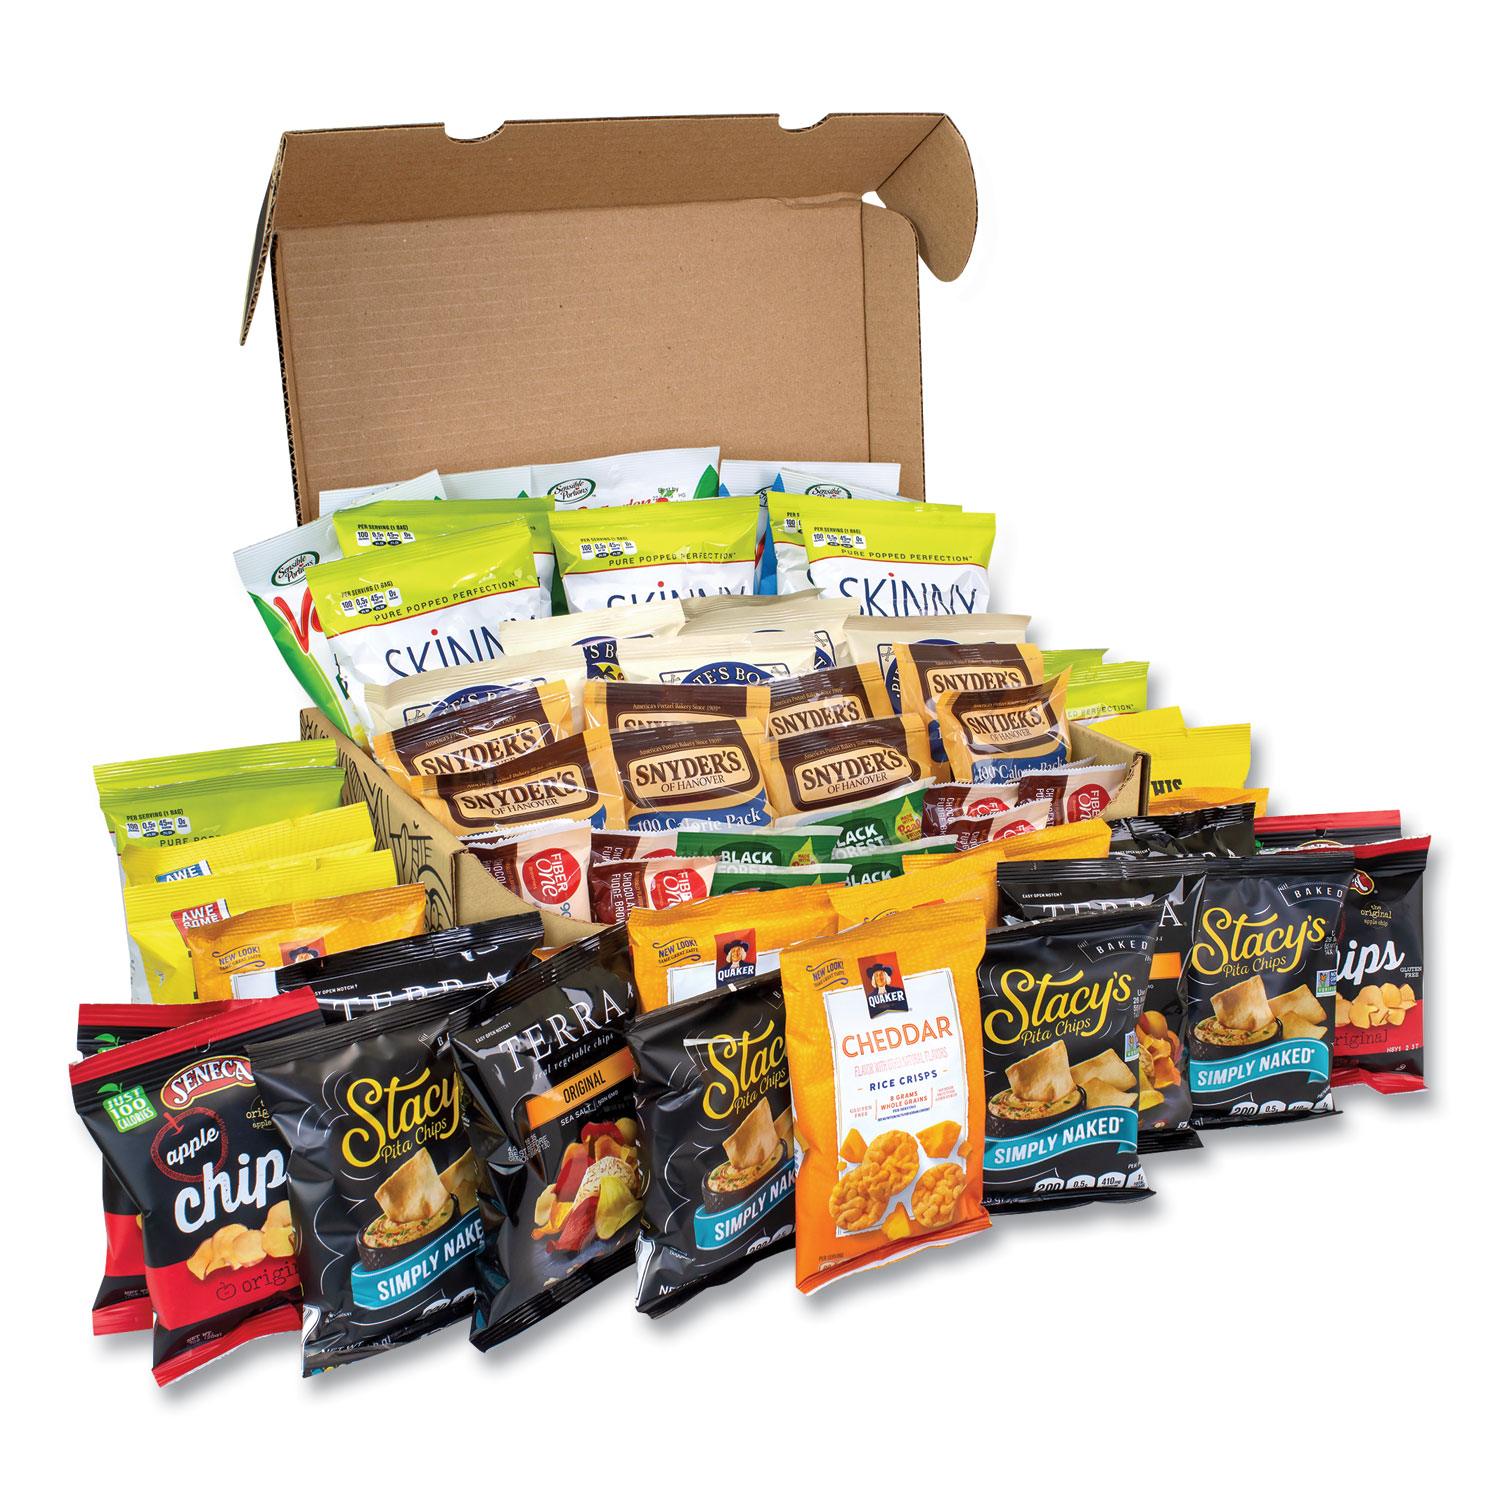  Snack Box Pros 70000025 Big Healthy Snack Box, 61 Assorted Snacks, Free Delivery in 1-4 Business Days (GRR700S0025) 